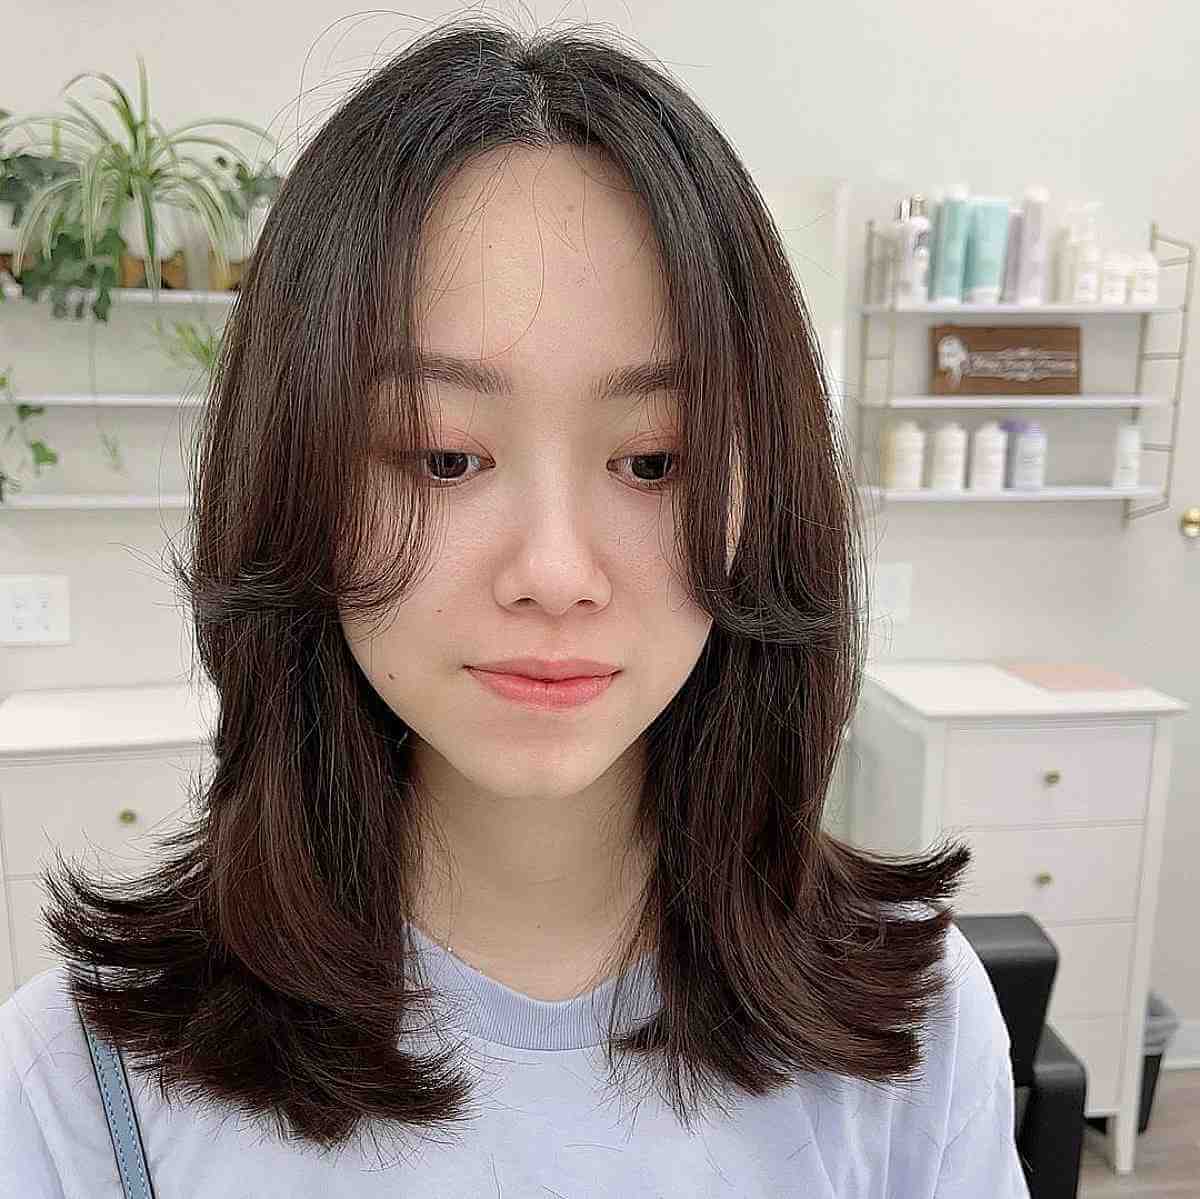 Shoulder-Length Textured Straight Cut with Long Curtain Bangs